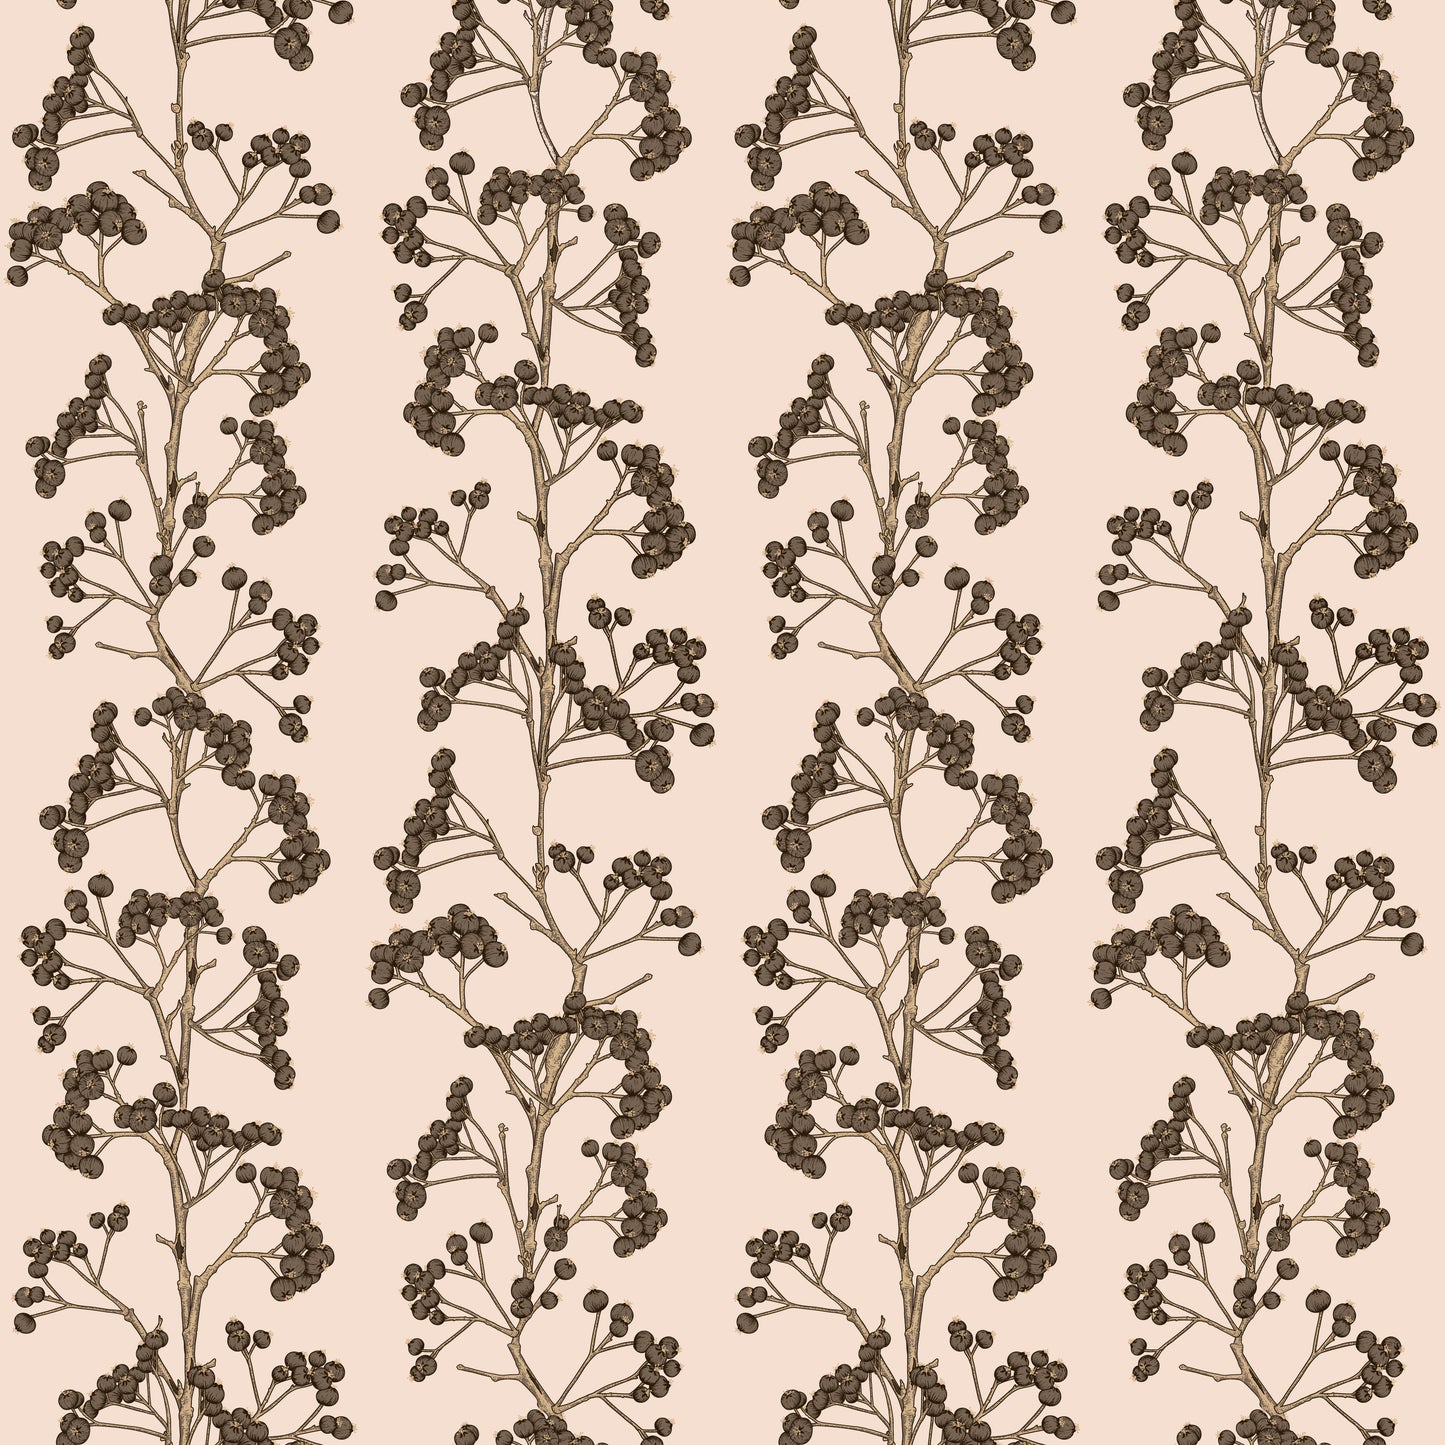 Brown firethorn print on rose/pink background easy to install and remove peel and stick custom wallpaper available in different lengths/sizes locally created and printed in Canada. Removable, washable, durable, commercial grade, customizable and water proof.